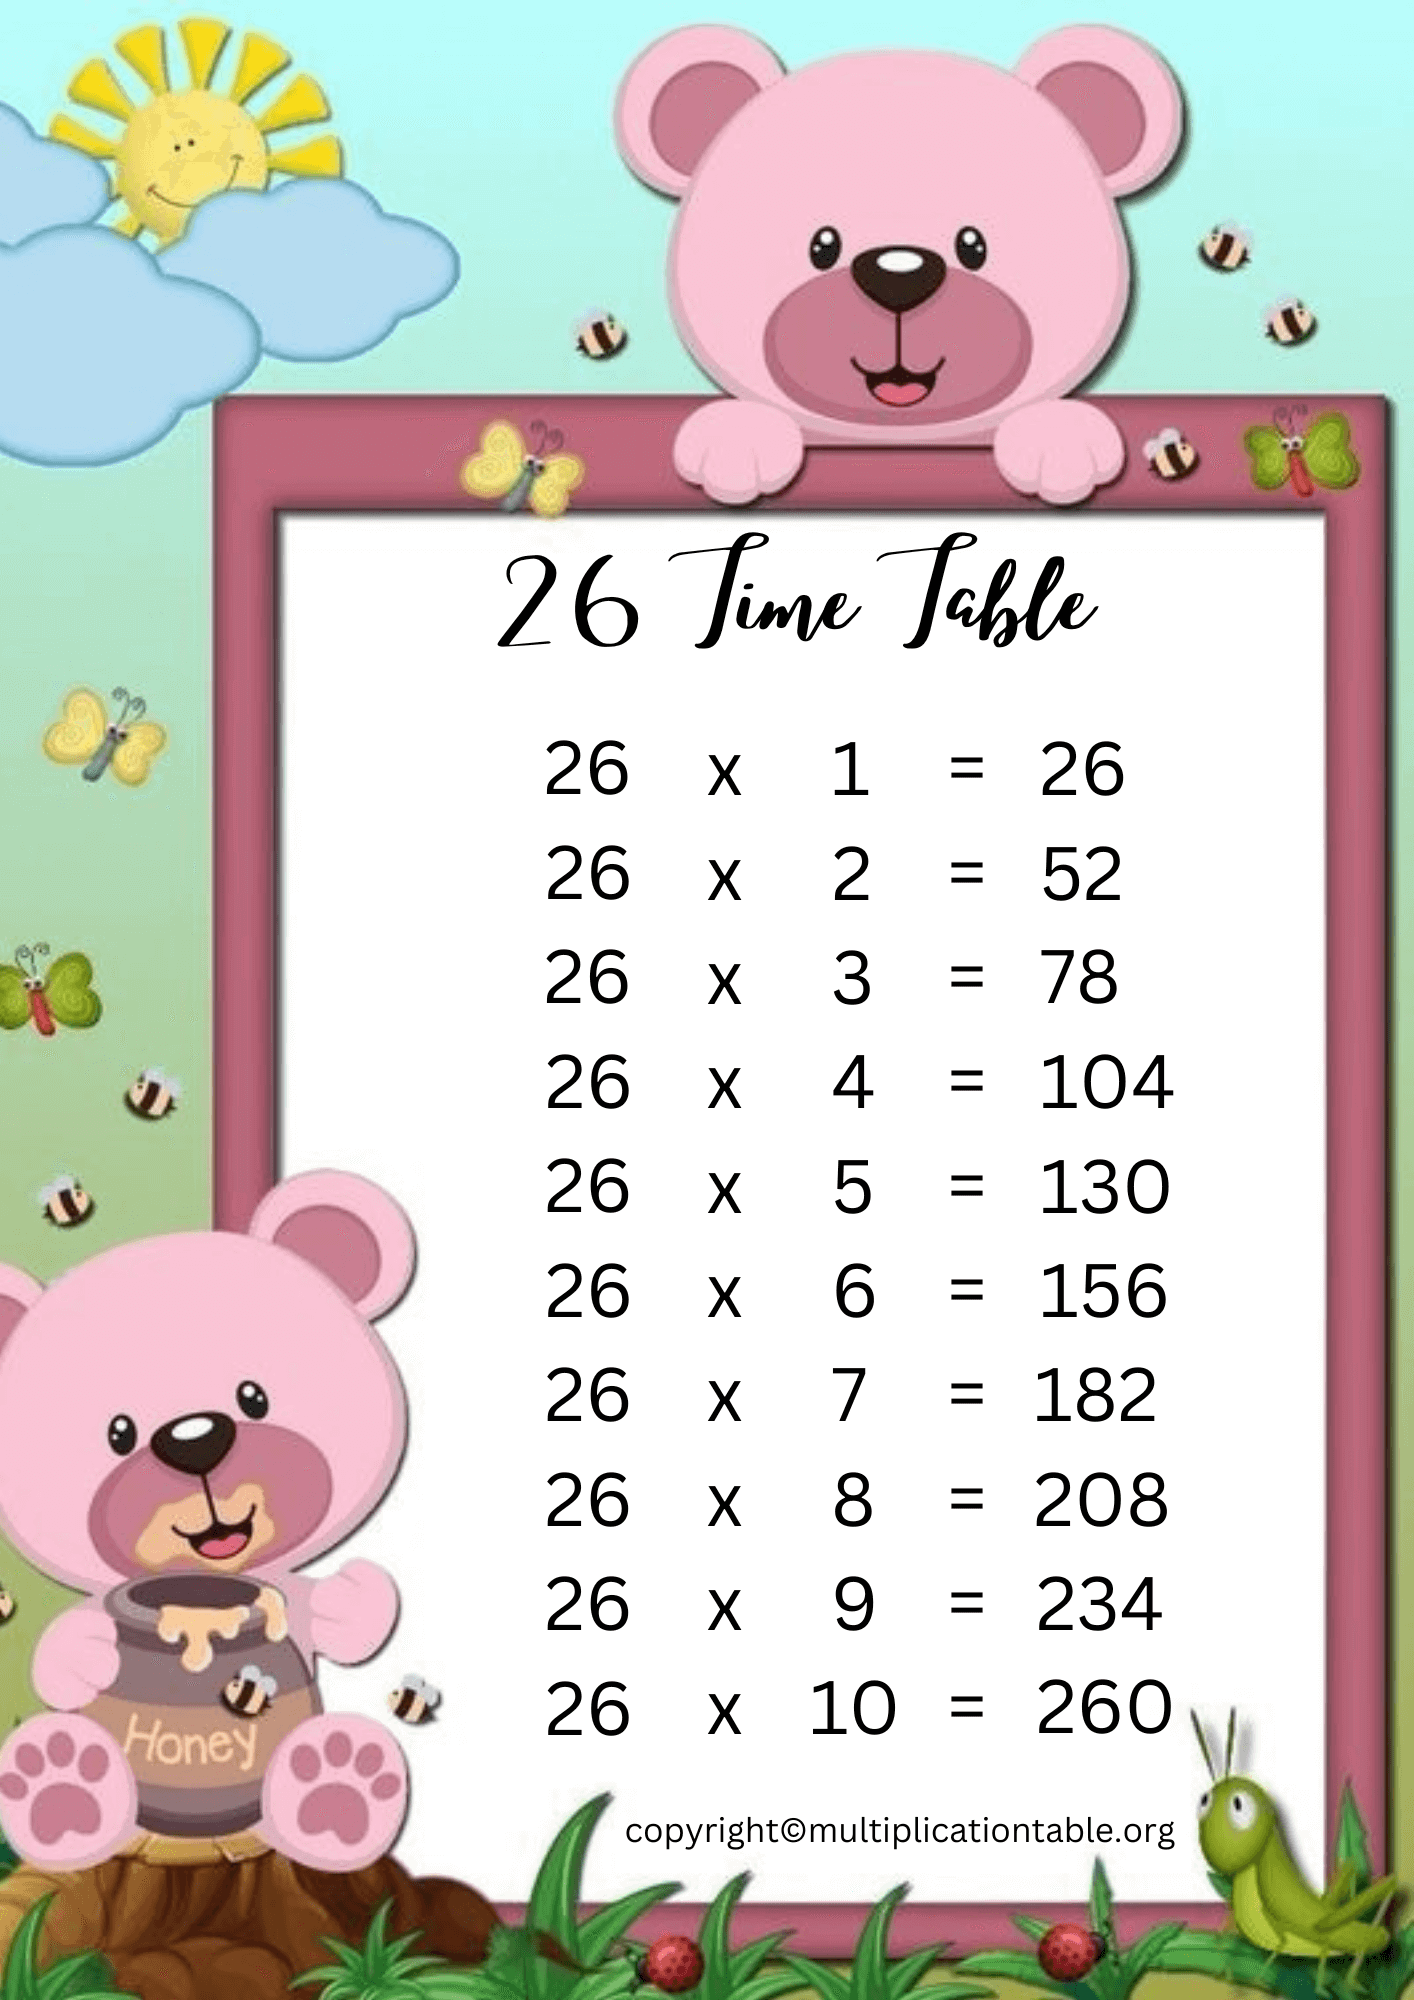 26 Times Table